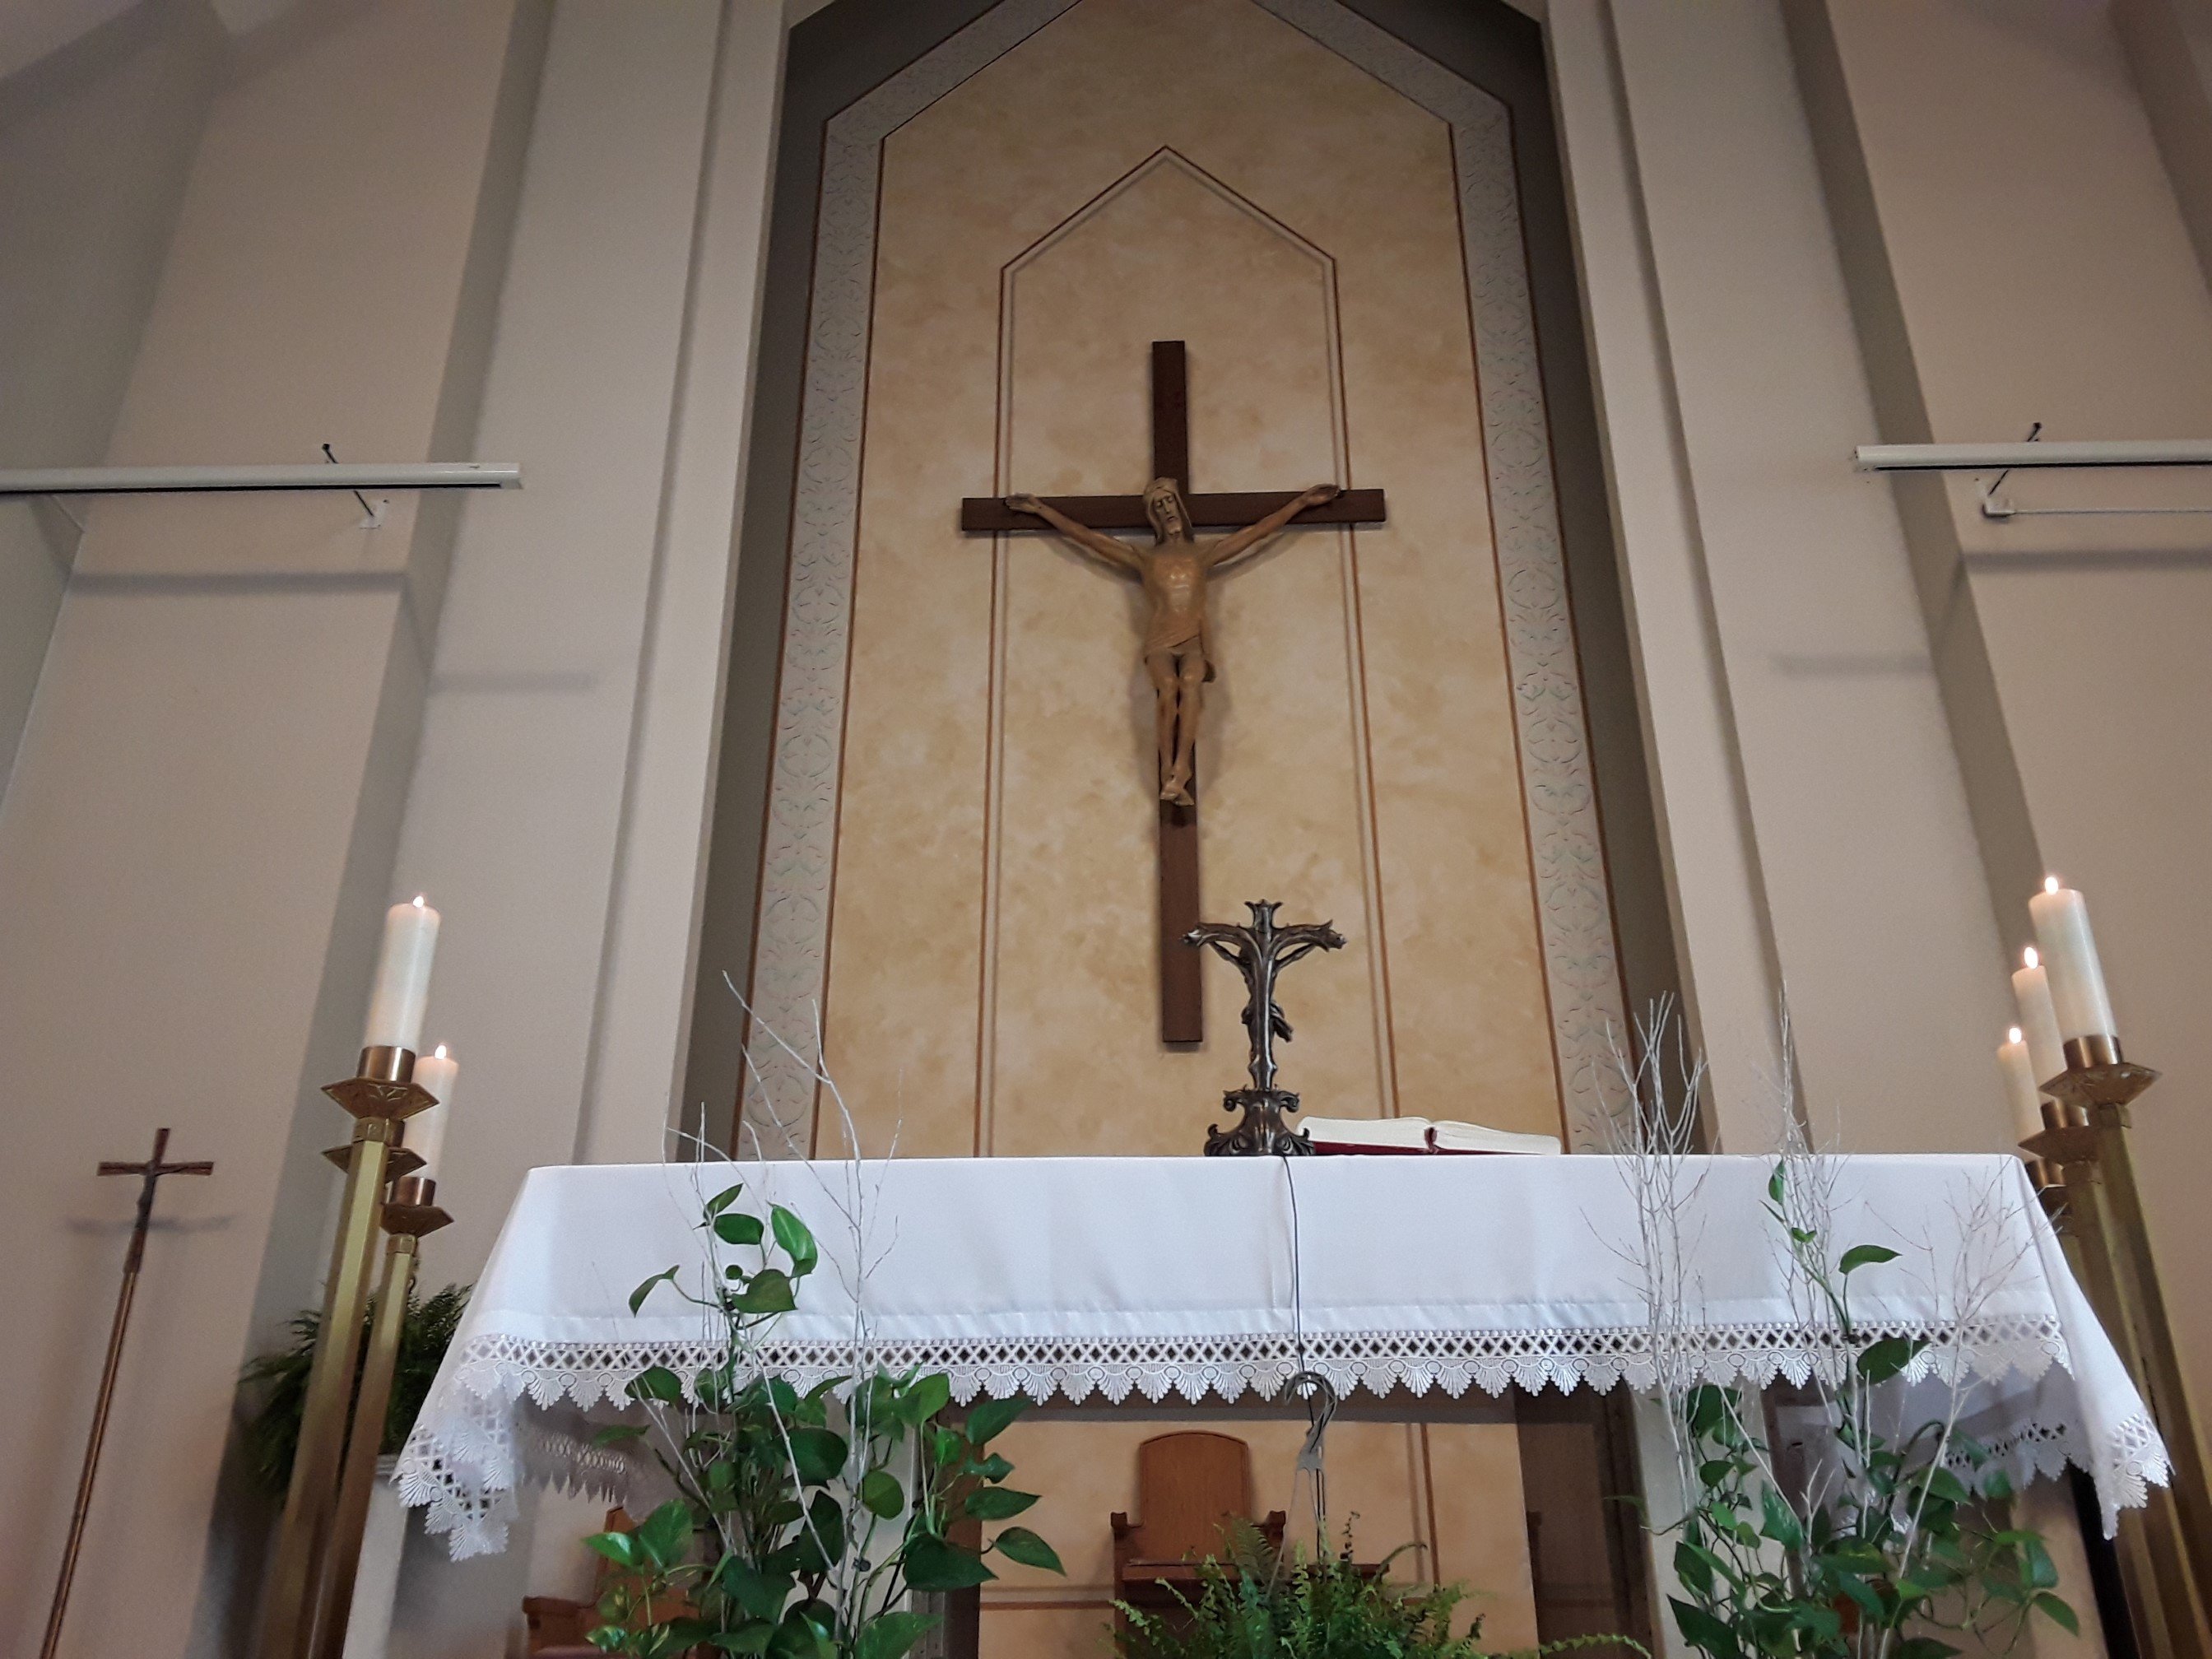 Picture of altar with big crucifix in background